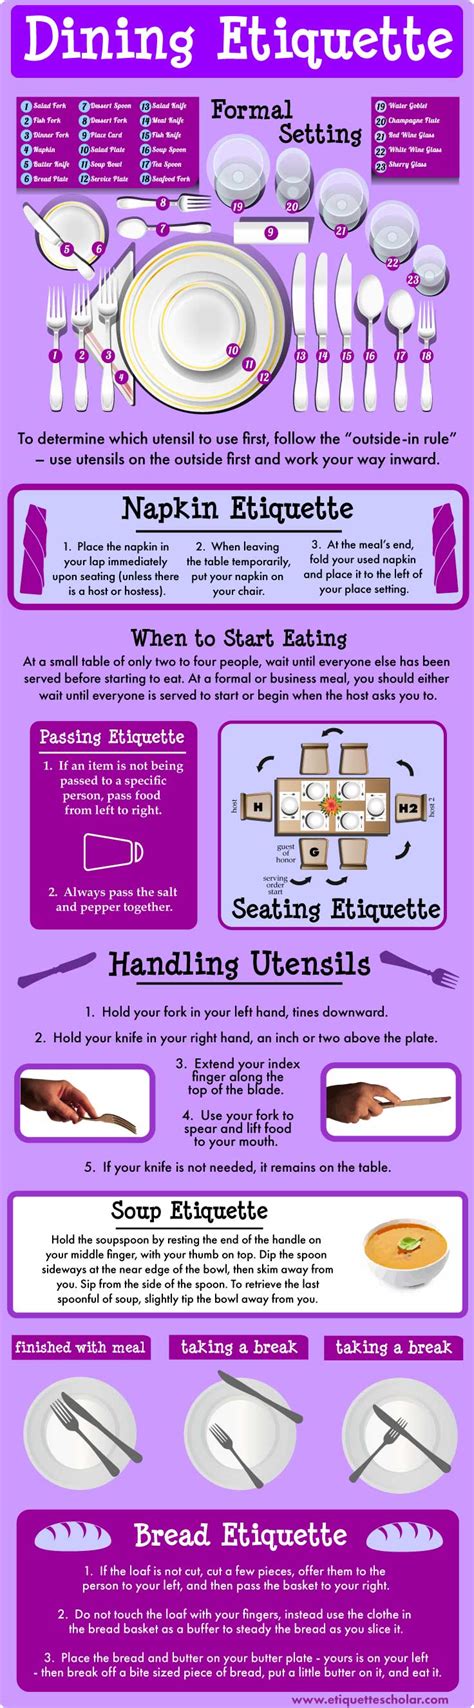 Rules of etiquette cover behavior in talking, acting, living, and moving; Table Manners 101 Ultimate Guide Video Instructions